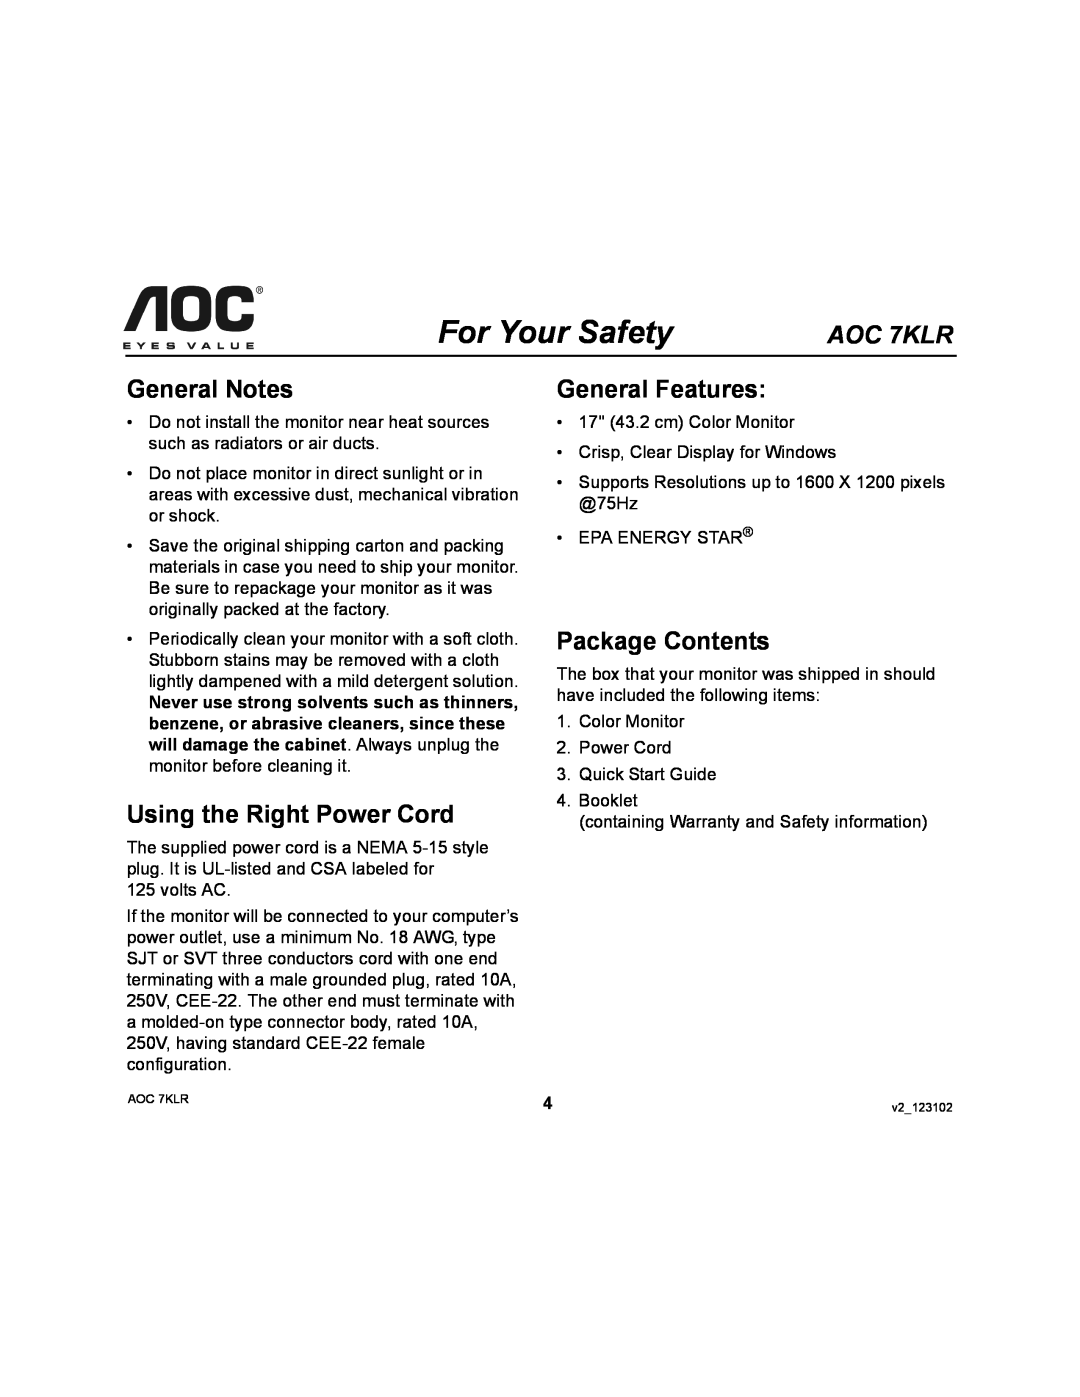 AOC user manual General Notes, Using the Right Power Cord, General Features, Package Contents, For Your Safety, AOC 7KLR 